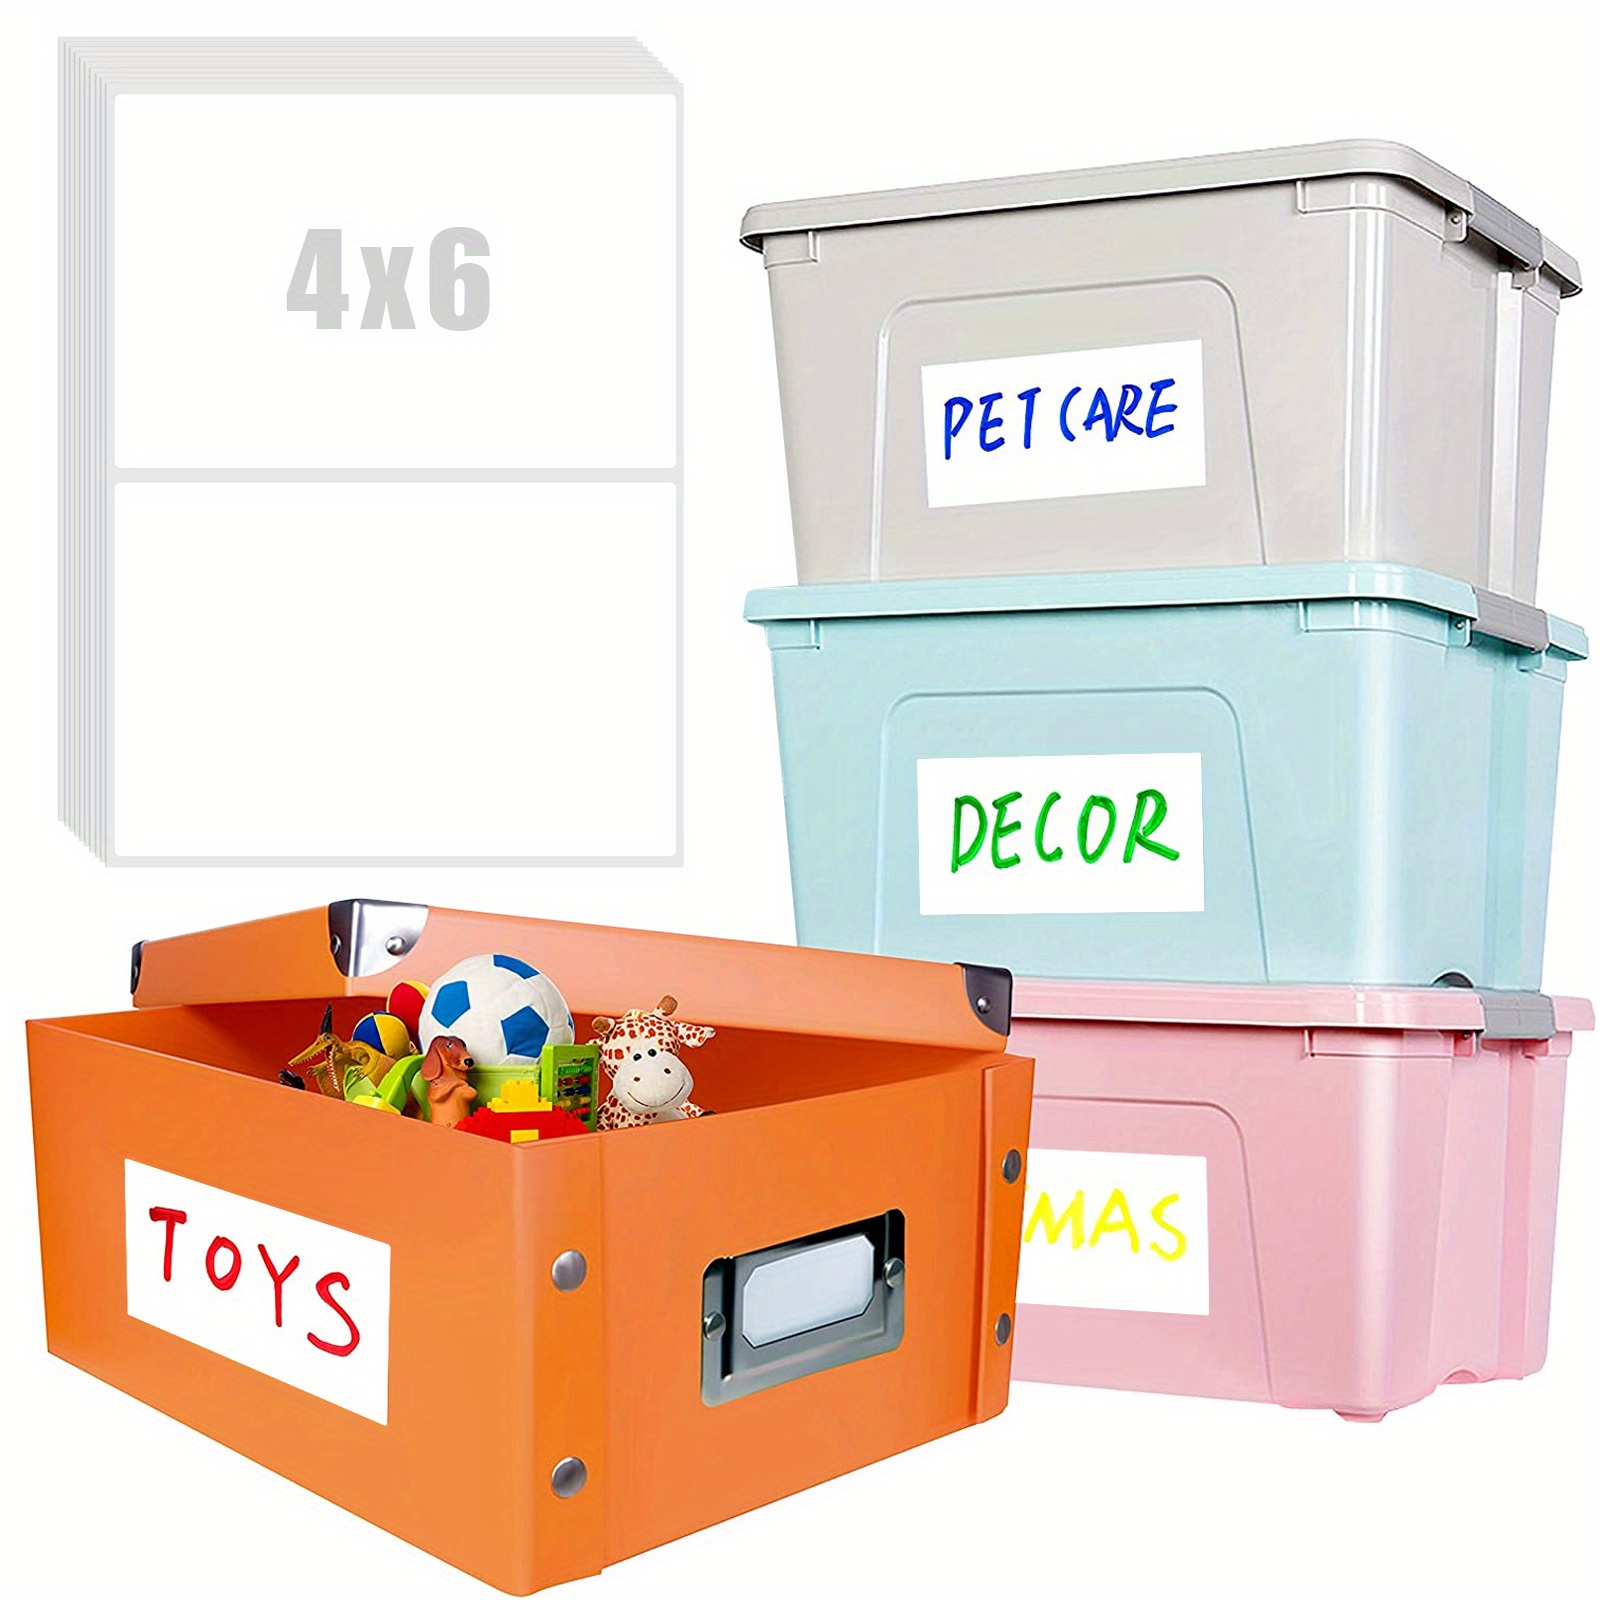 Photo Storage Boxes for 4x6 Pictures (Box Only)- Holds up to 9 4